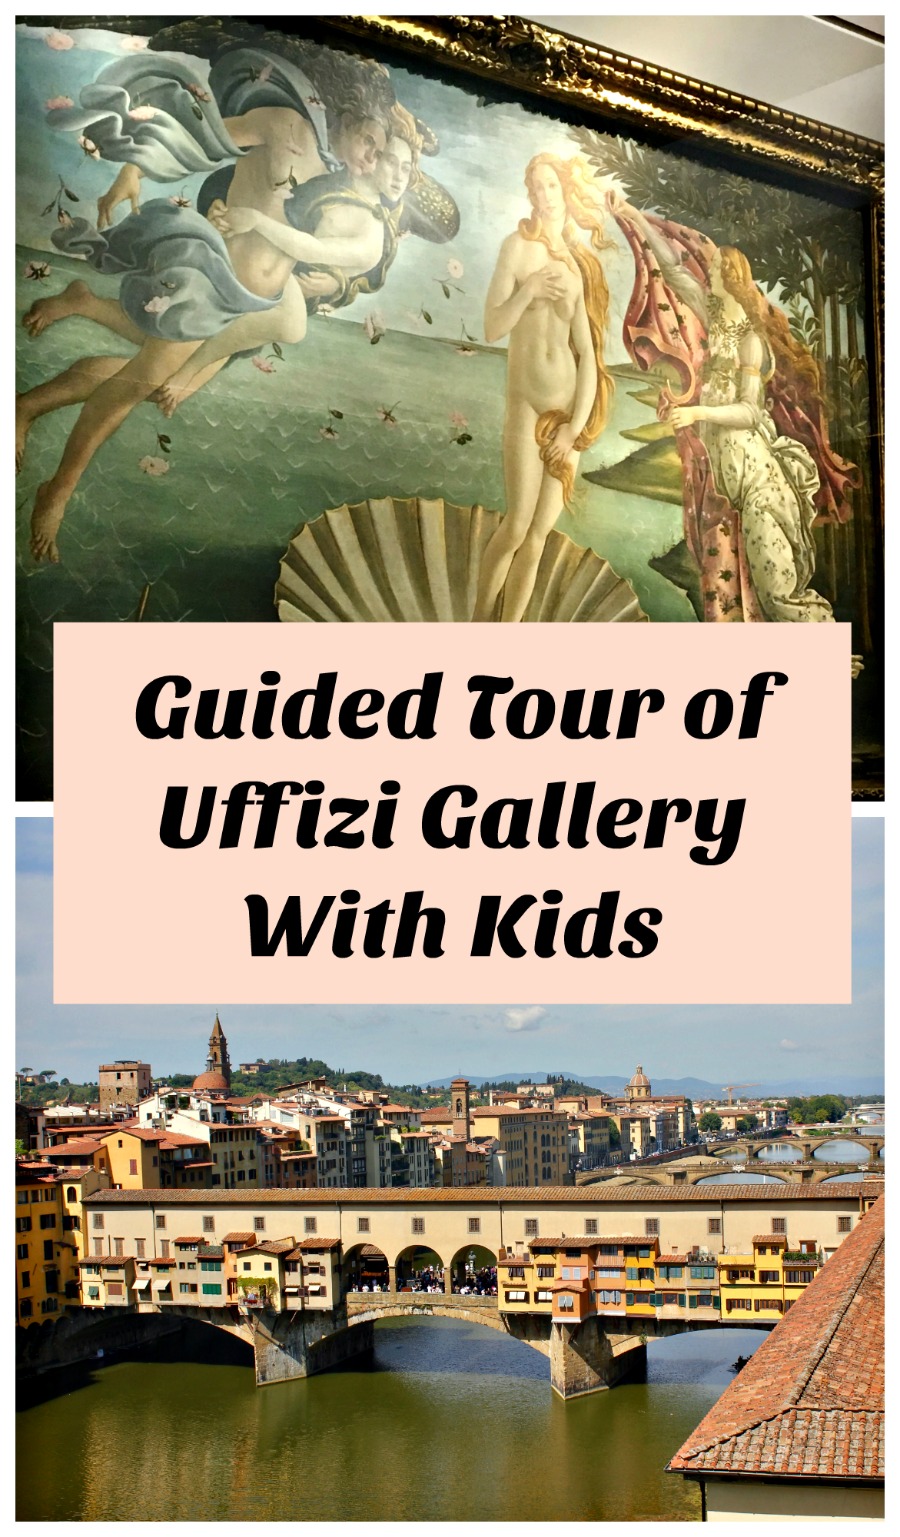 Guided tour of Uffizi gallery with kids, Florence, LivItaly tours #florencewithkids #italytrip #familytravel